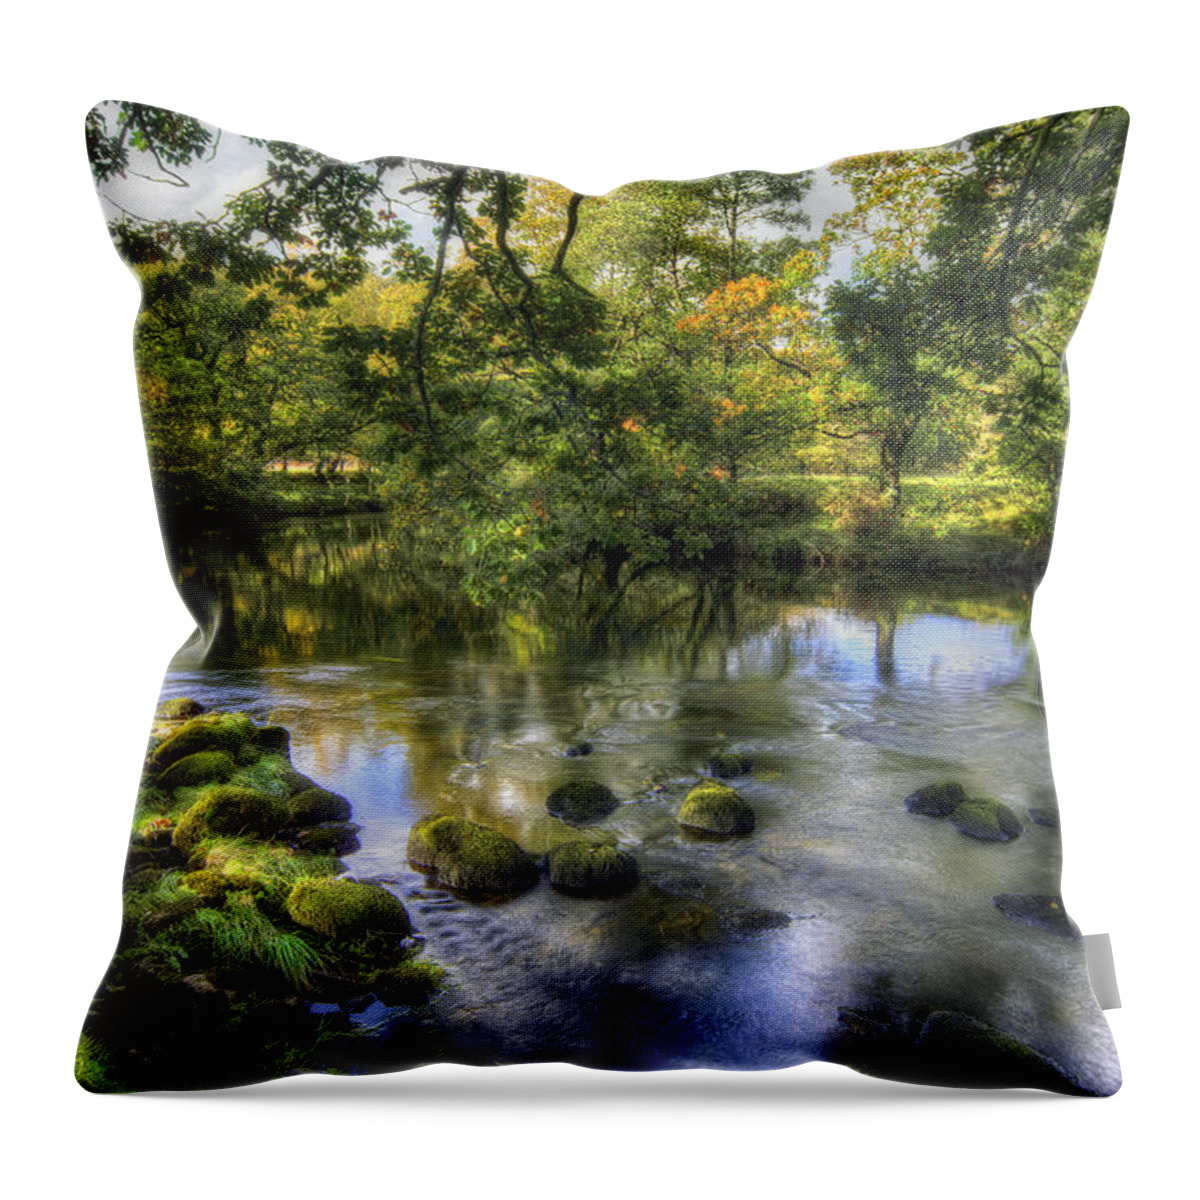 River Throw Pillow featuring the photograph Peaceful River by Ian Mitchell